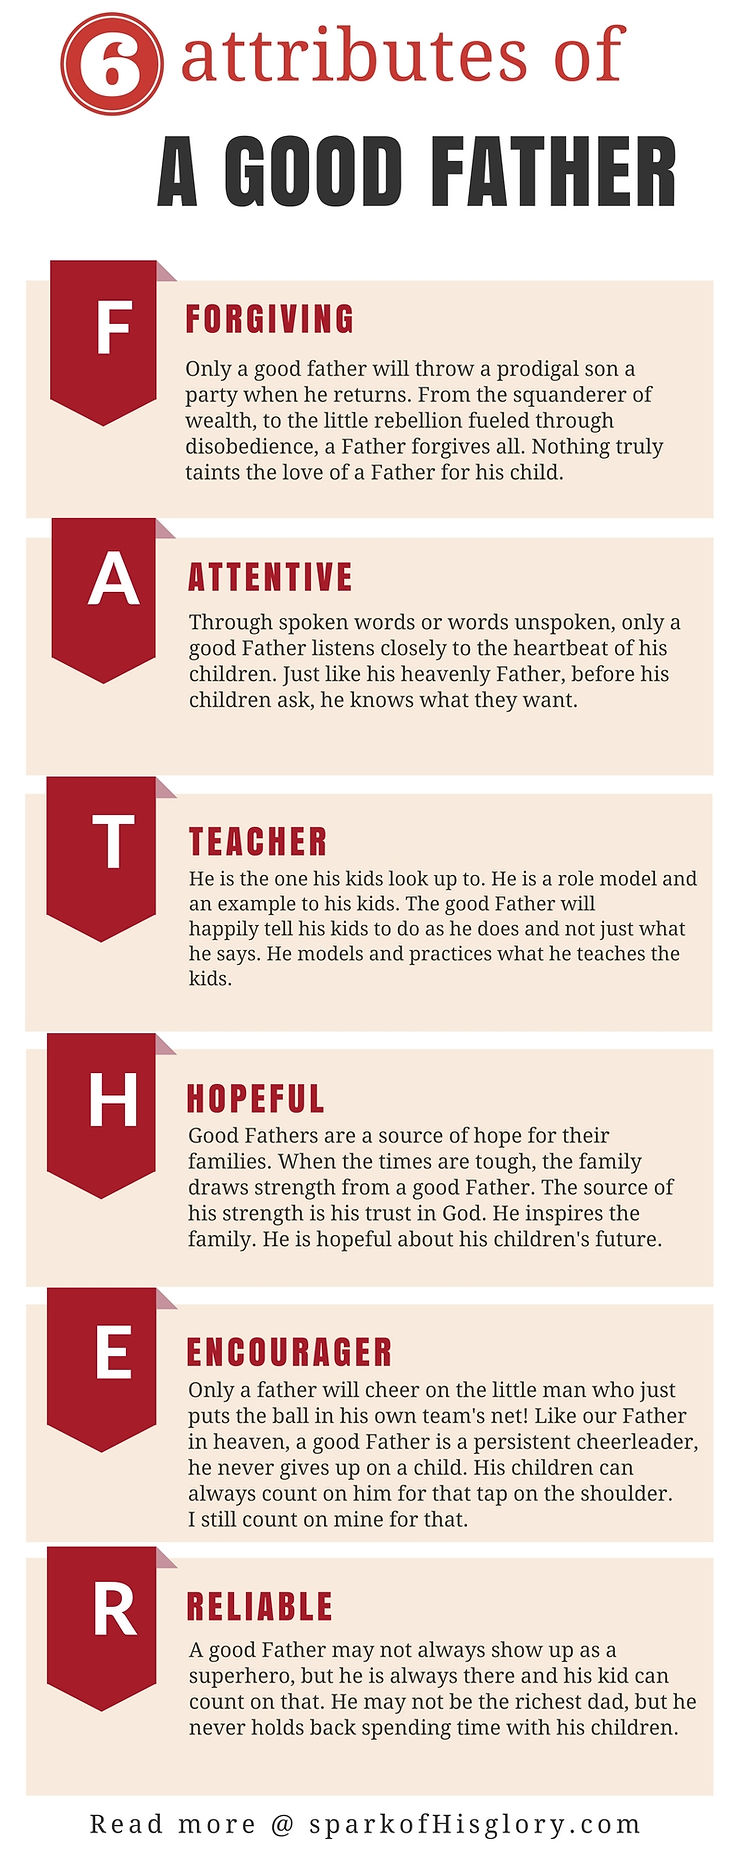 6 Attributes of a Good Father